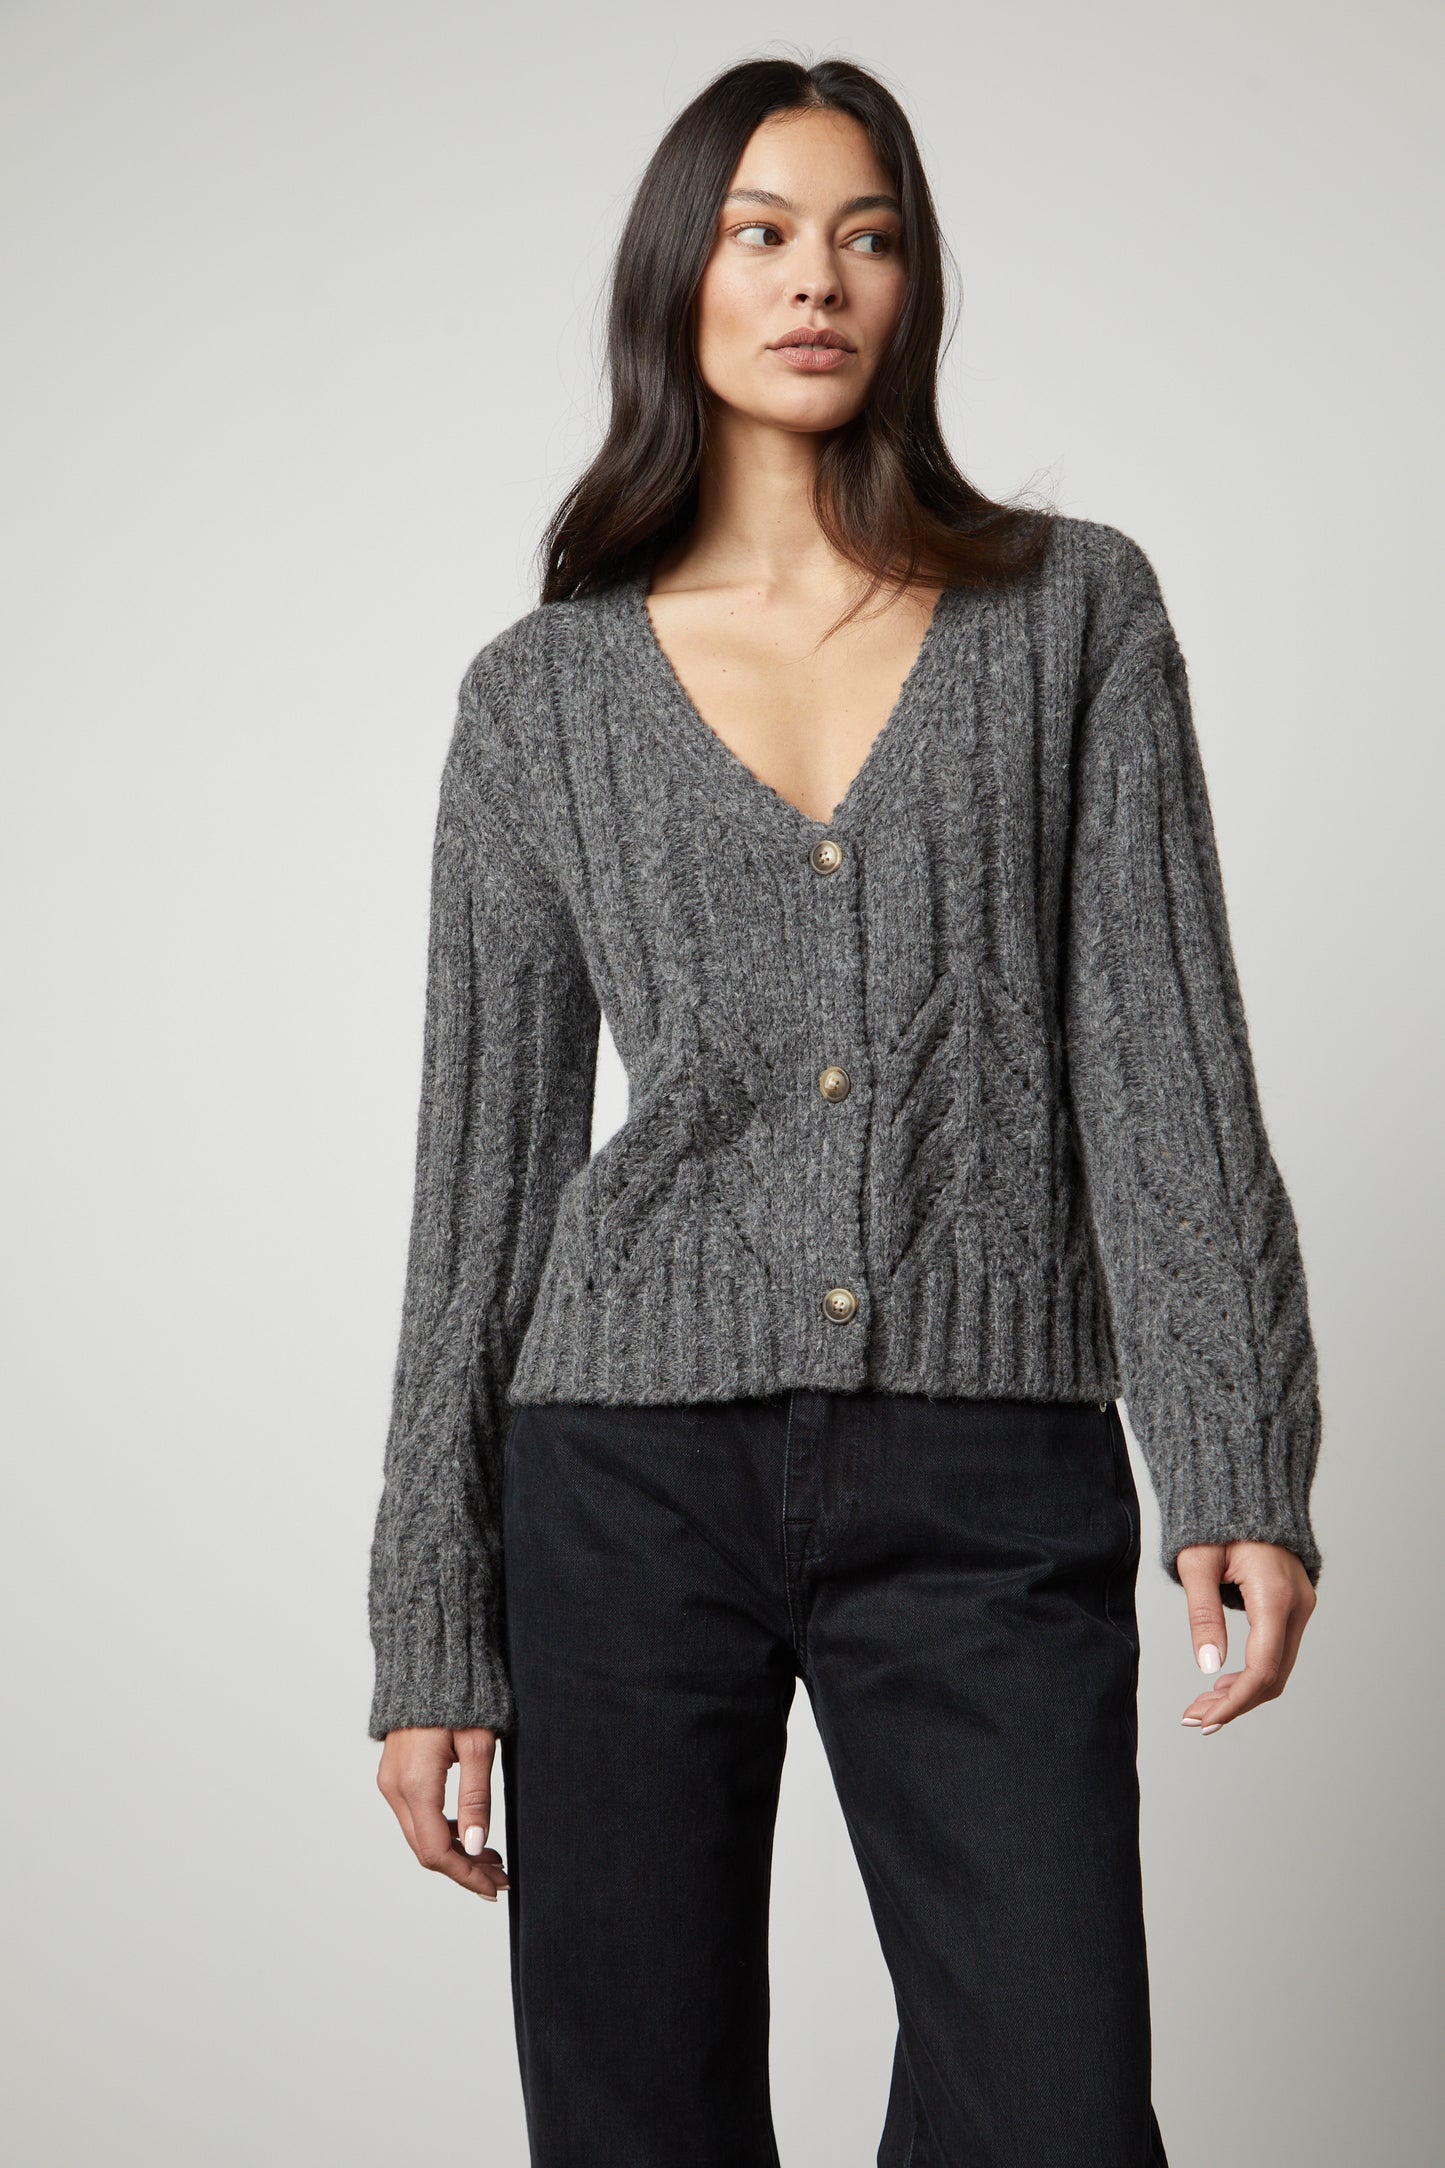 The model is wearing a Velvet by Graham & Spencer Hazel Alpaca Cable Knit Cardigan.-26897822154945